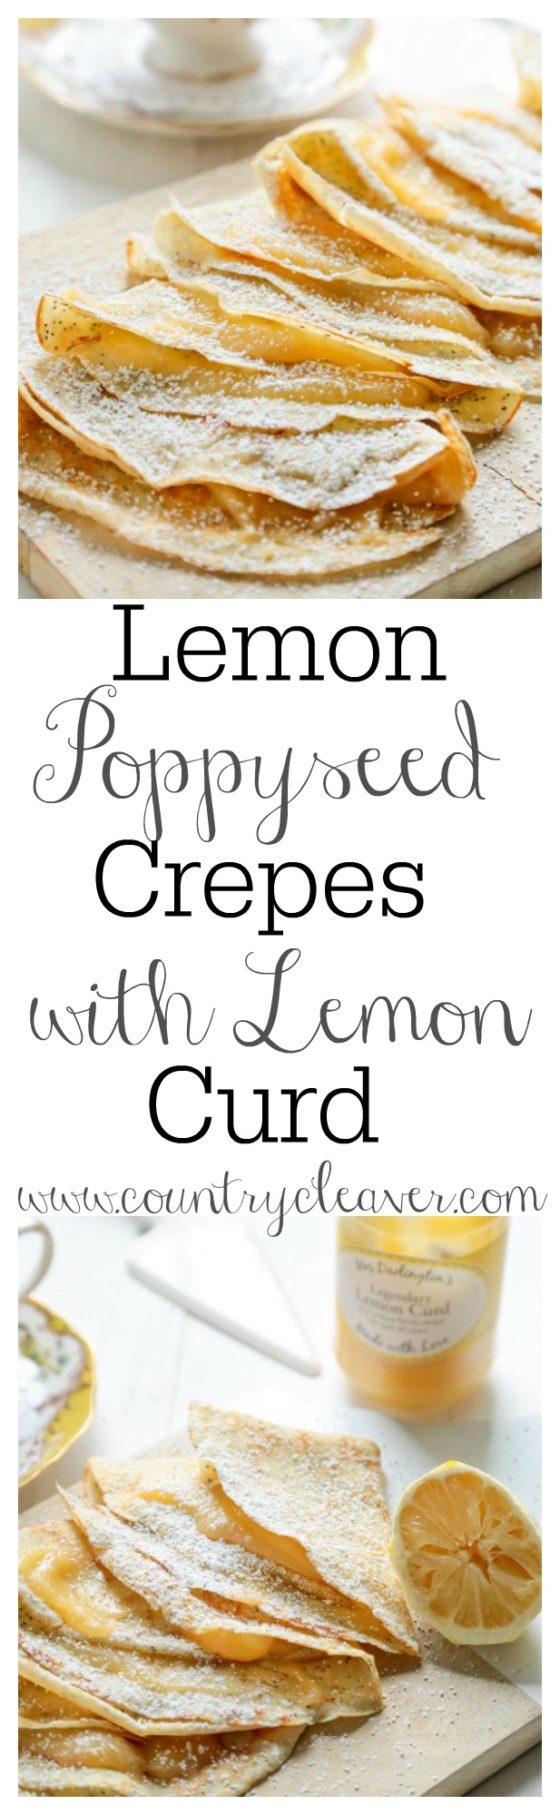 Lemon Poppyseed Crepes with Lemon Curd--www.countrycleaver.com